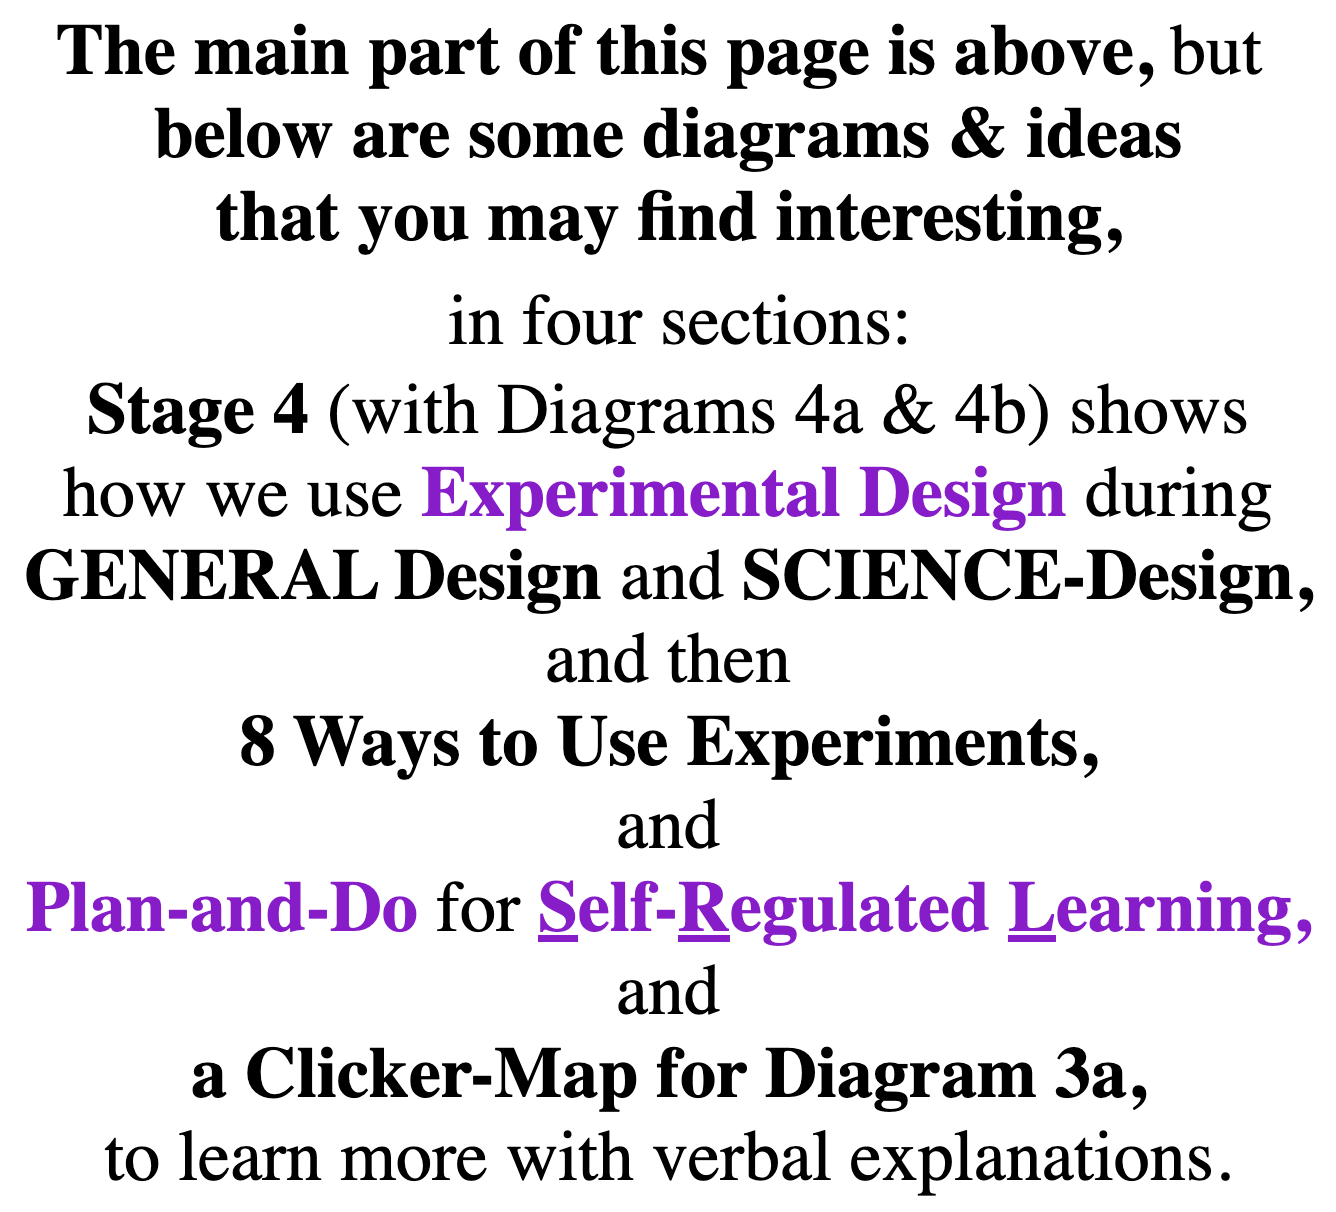 above is main part of page, below are sections about Stage 4 (Designing Experiments),  8 Ways to Use Experiments,  Plan-and-Do for Self-Regulated Learning,  Diagram 3a (clicker-map)